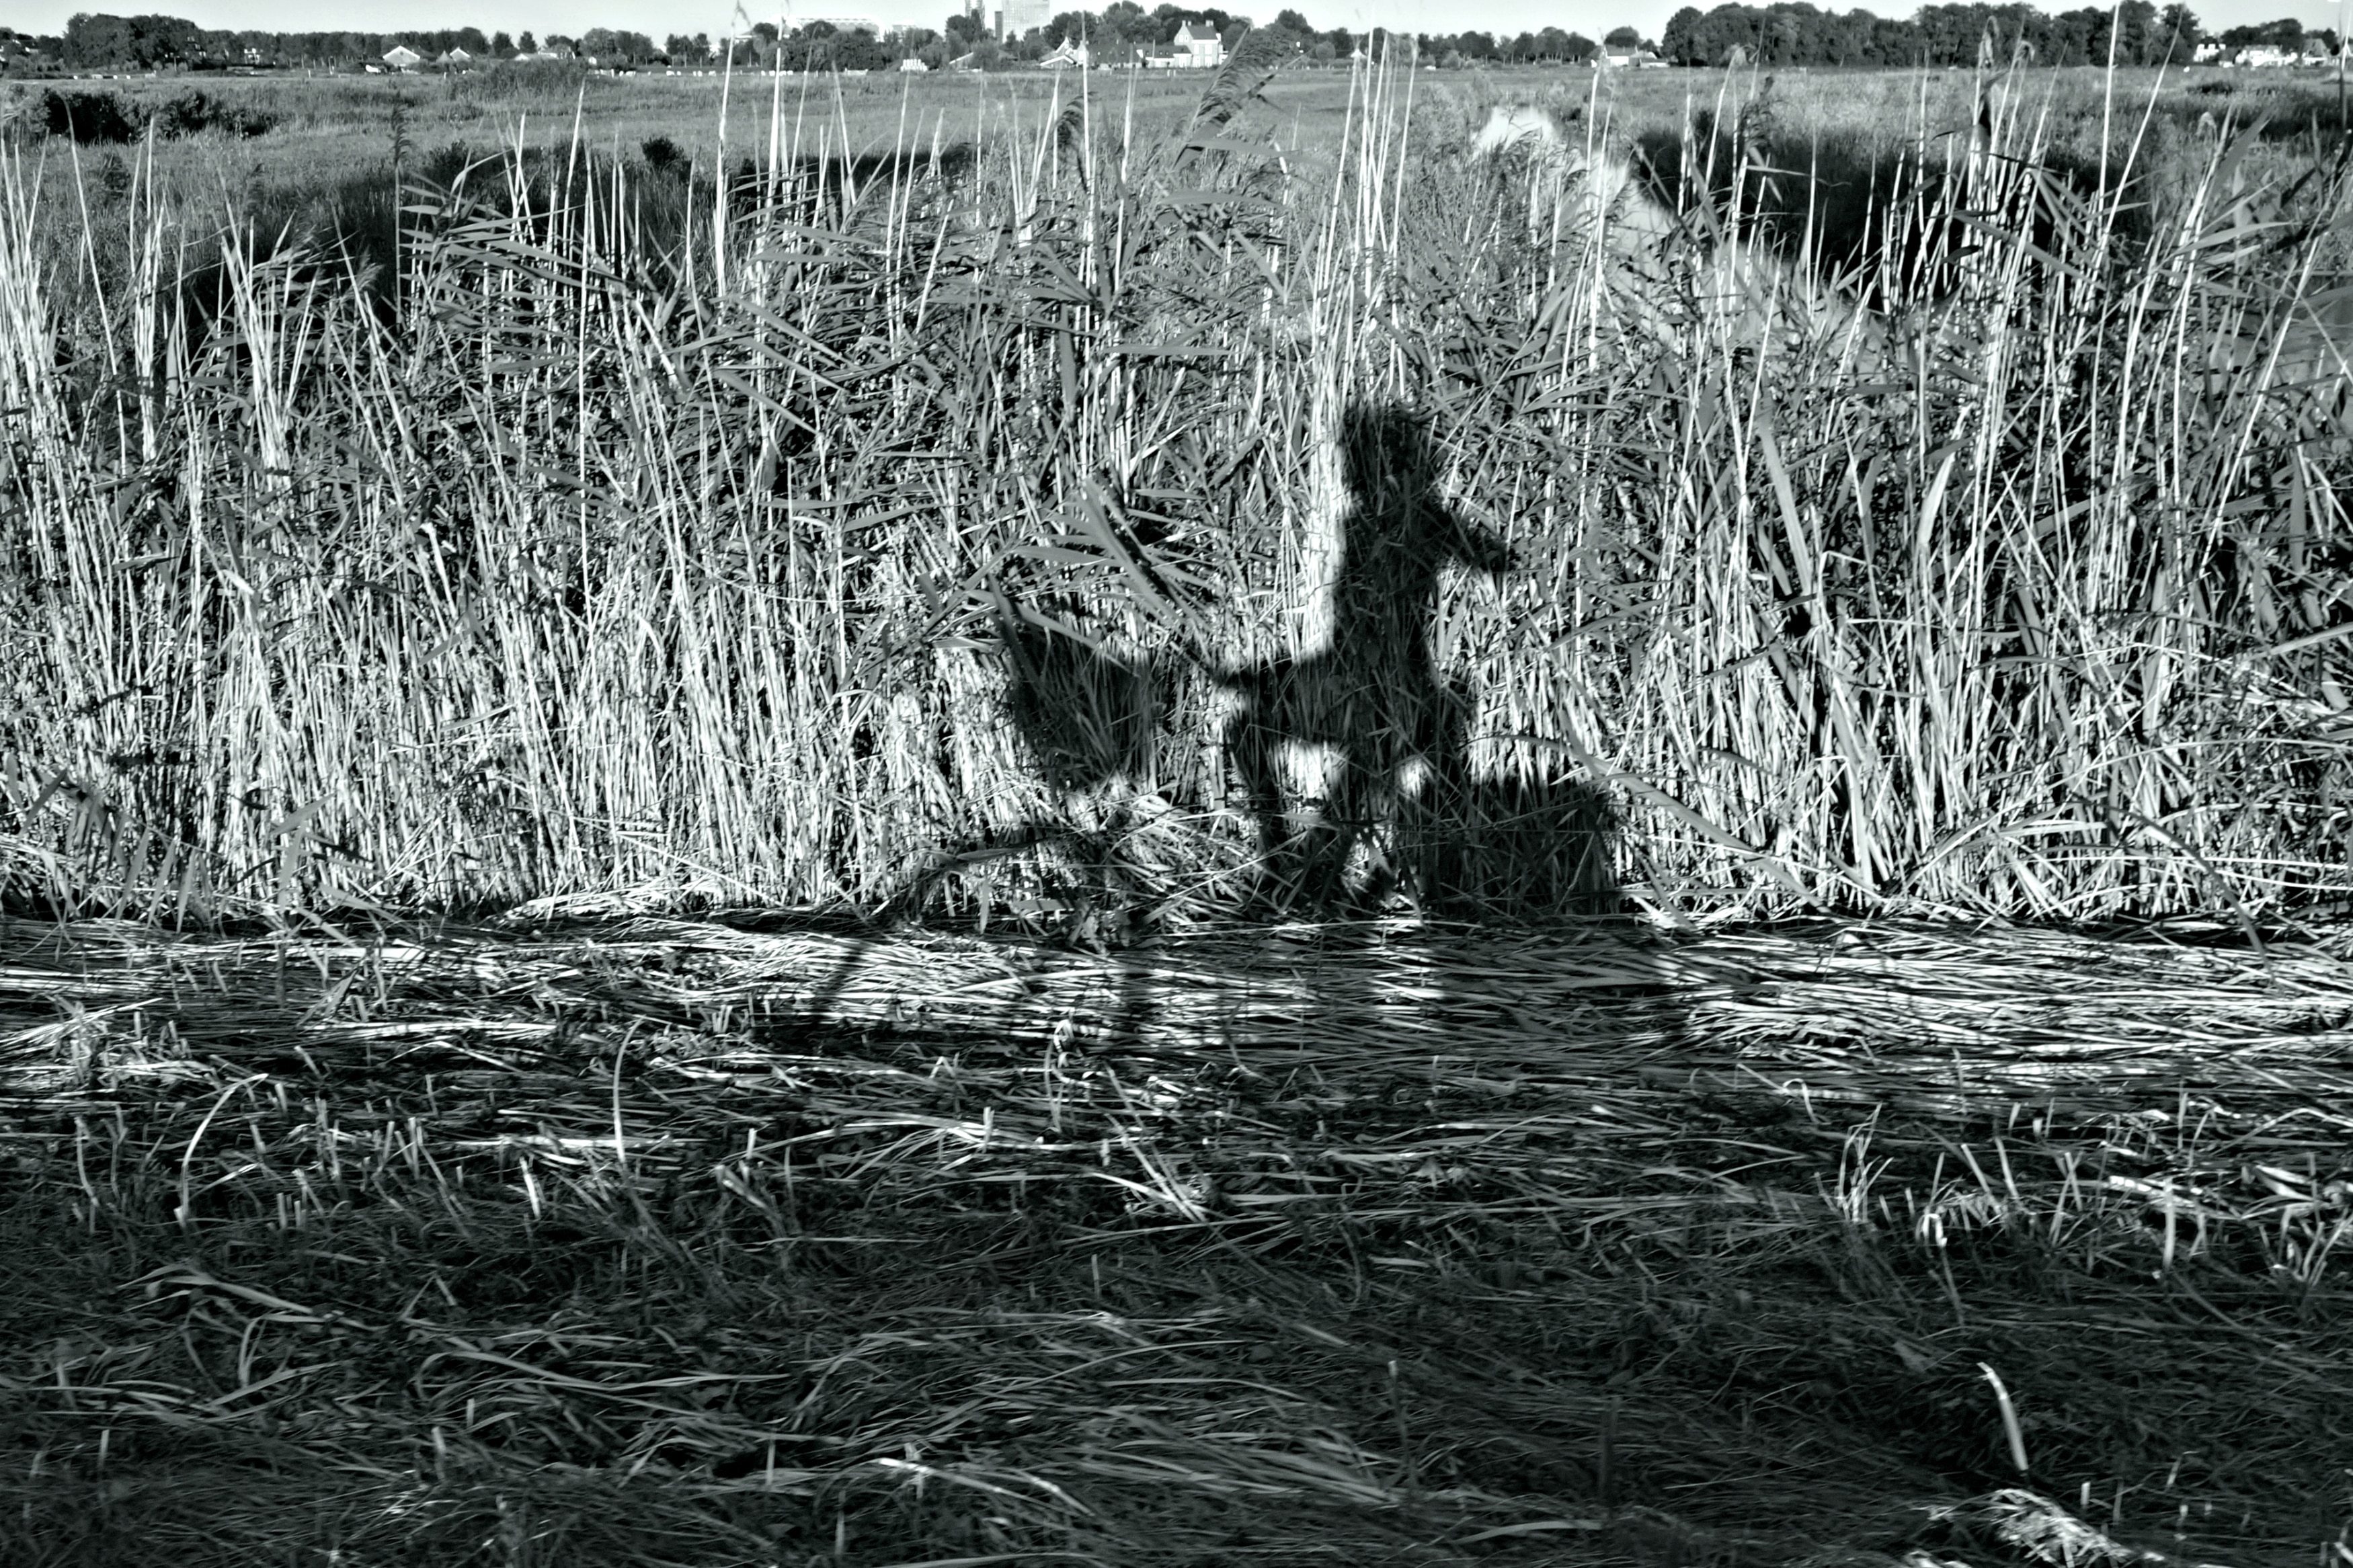 shadow of woman riding bicycle through grasses in grayscale photography